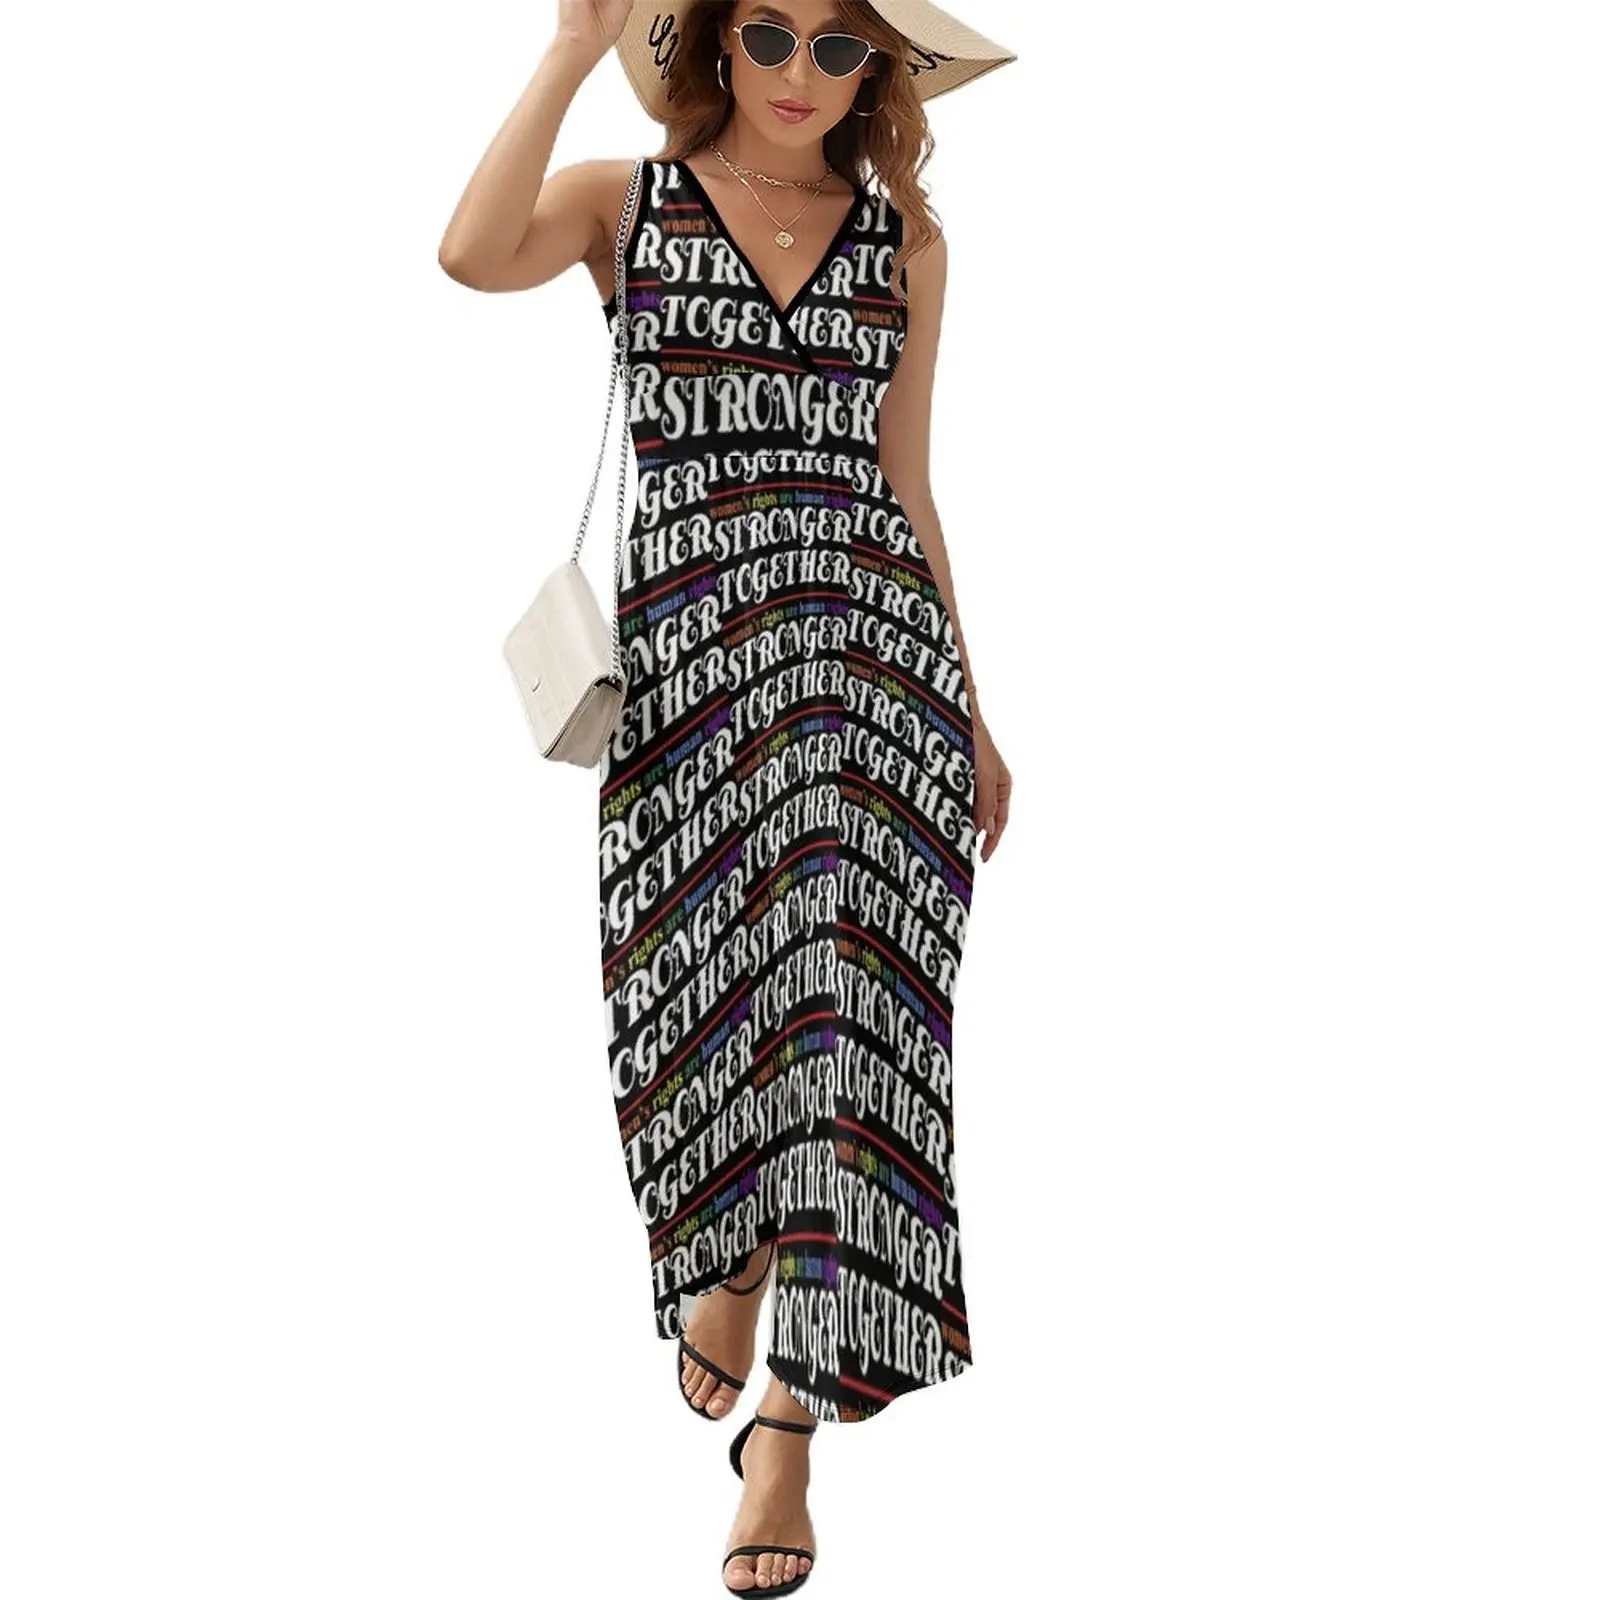 

Stronger Together Women's Rights Are Human Rights A-Line Dress Dress Cute Maxi Dress V Neck Graphic Boho Beach Long Dresses